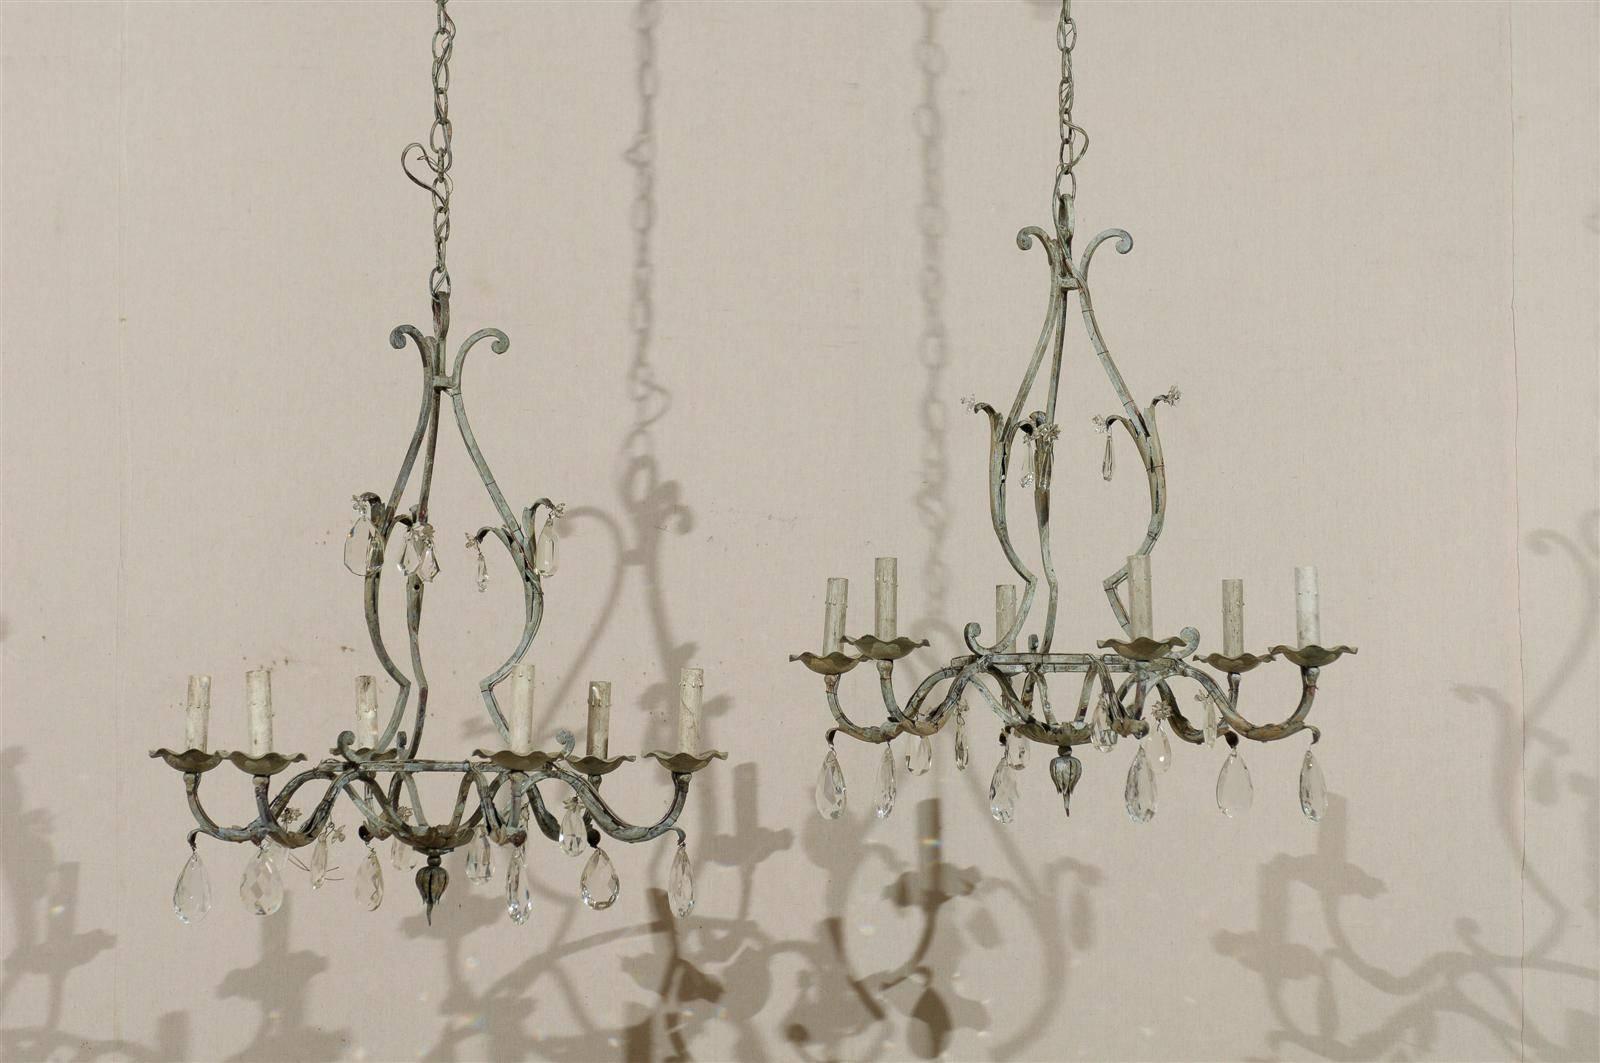 A pair of French vintage painted iron and crystal six-light chandeliers. This pair of painted iron chandeliers is decorated with discreet crystals, giving a very light and airy feel. The frame itself is made of a succession of scrolls. They have